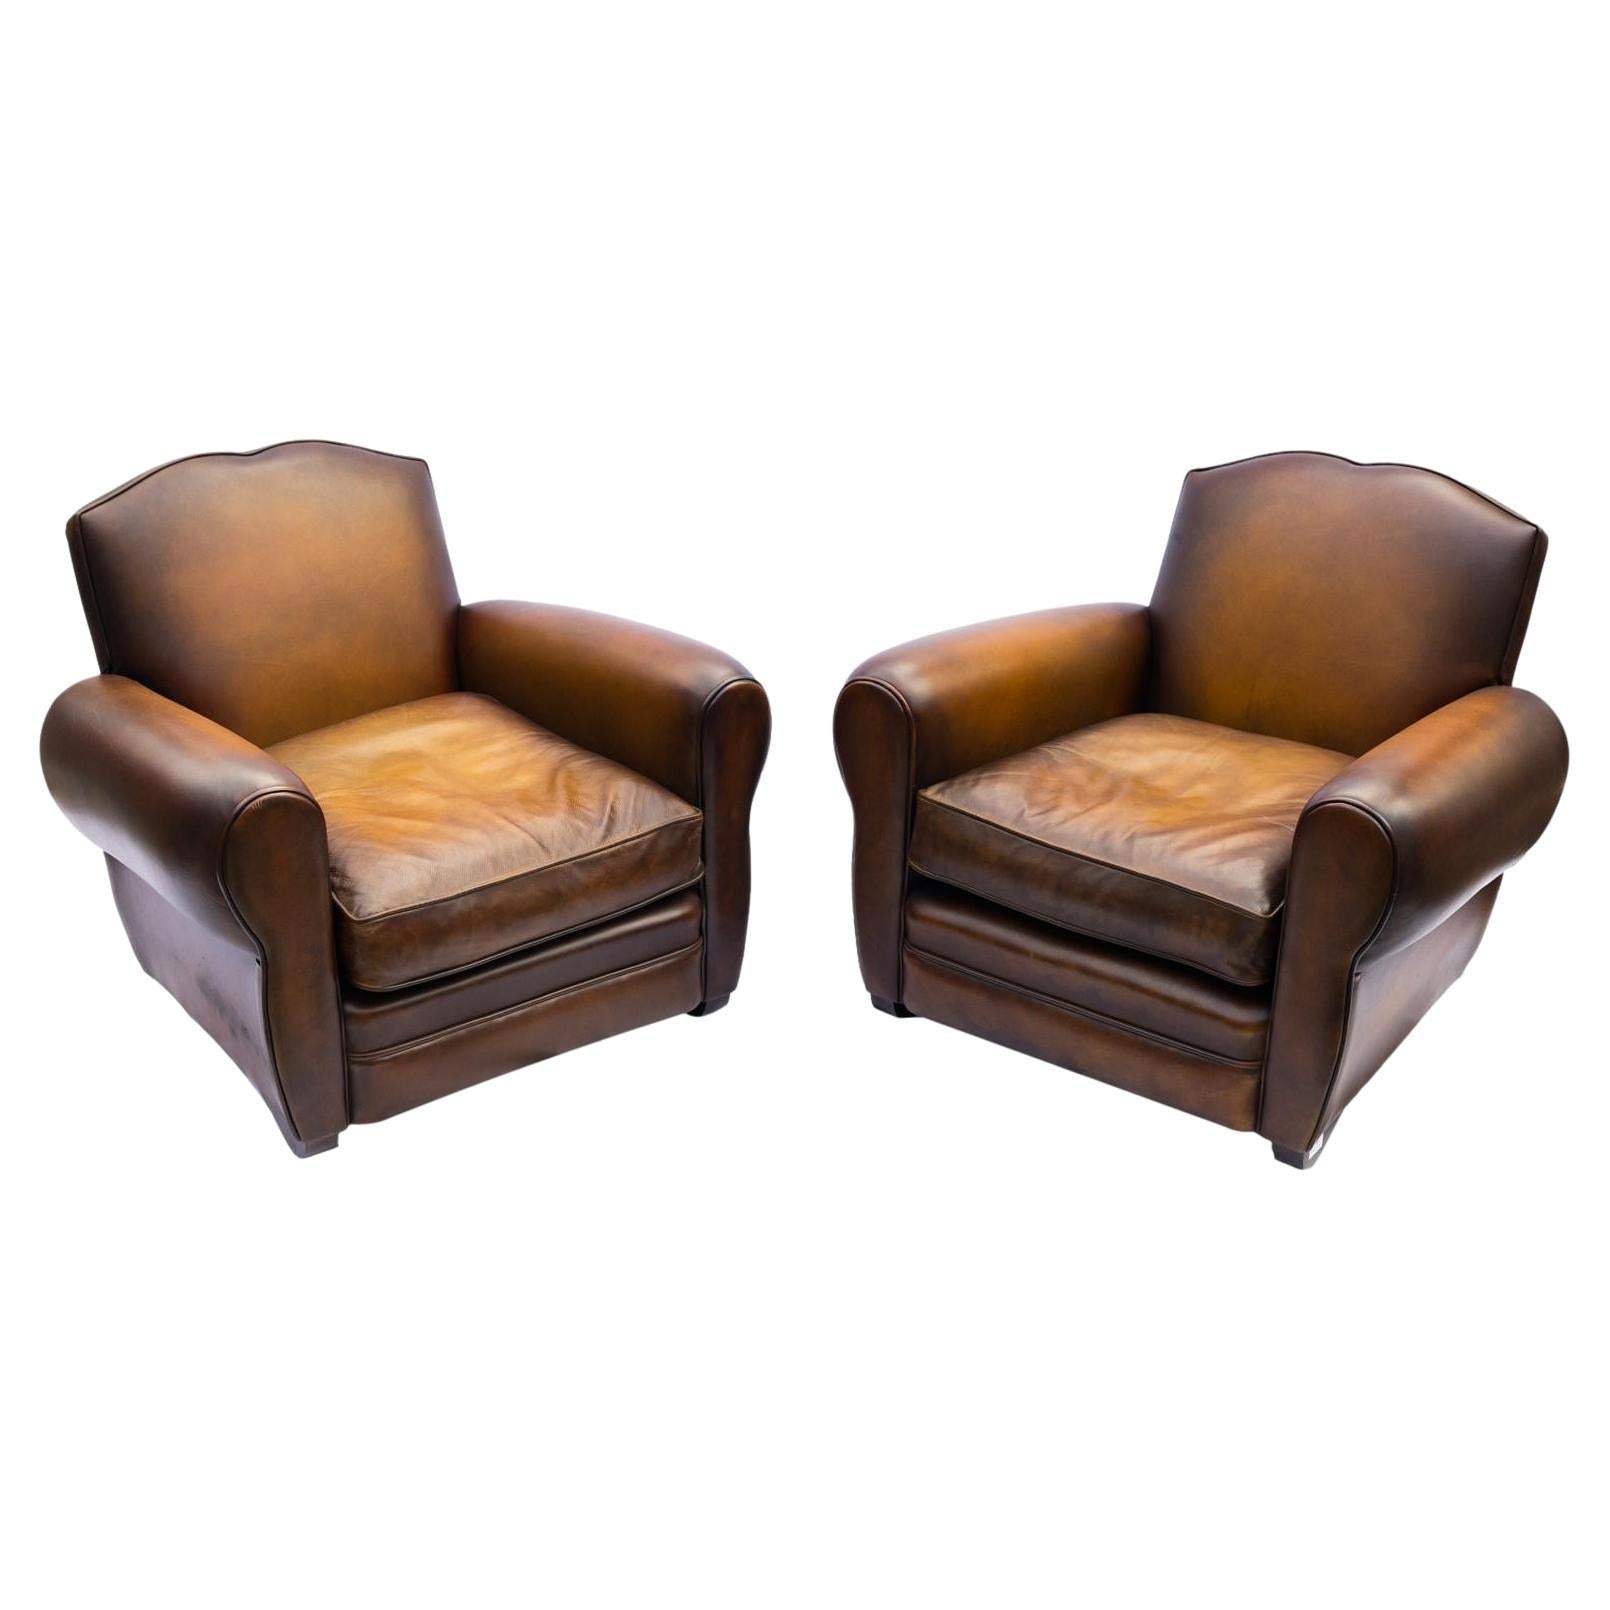 Pair of Art Deco Leather Club Chairs with Mustache Backs, French, ca. 1935